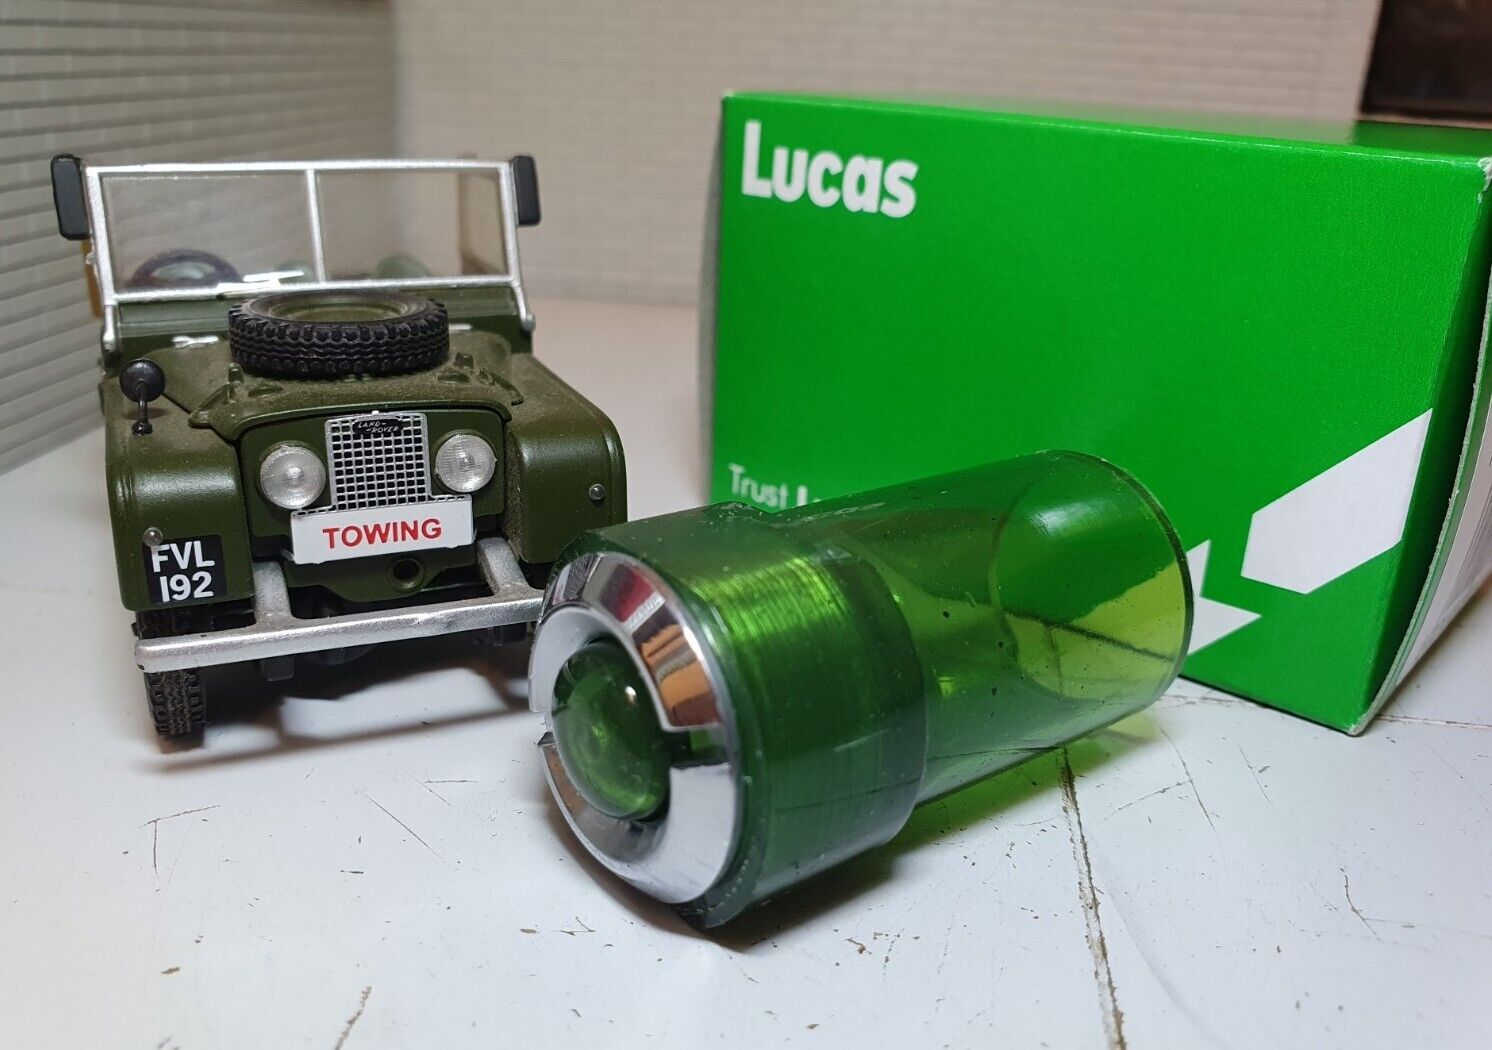 3/4 View of a Green Warning Light With Chrome Bezel with A Model Land Rover and Lucas Box in the Background